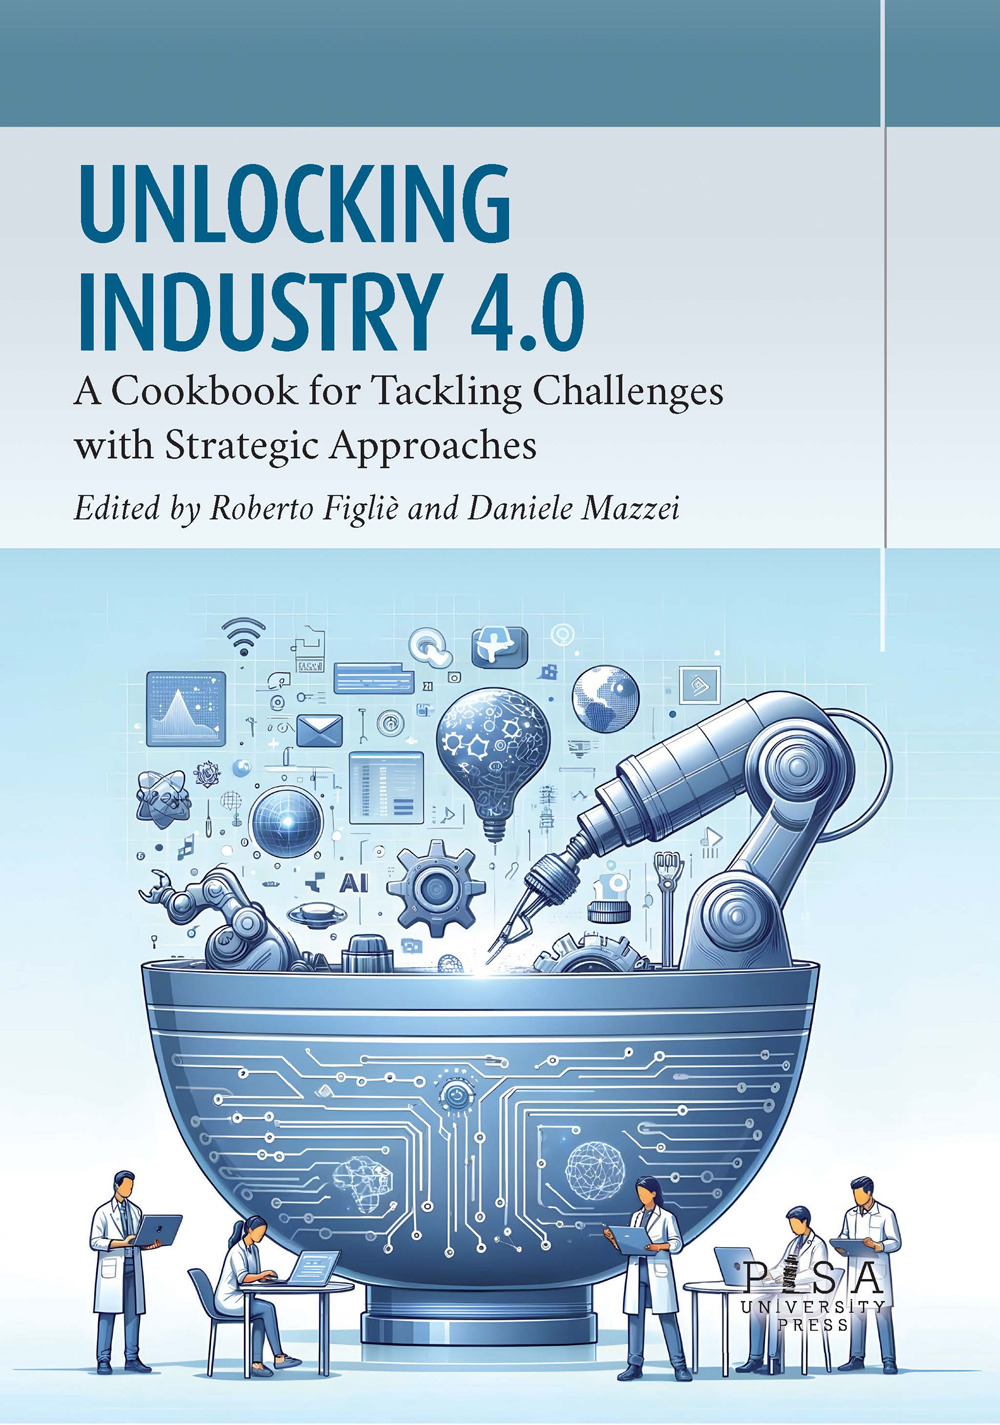 Unlocking industry 4.0. A cookbook for tackling challenges with strategic approaches